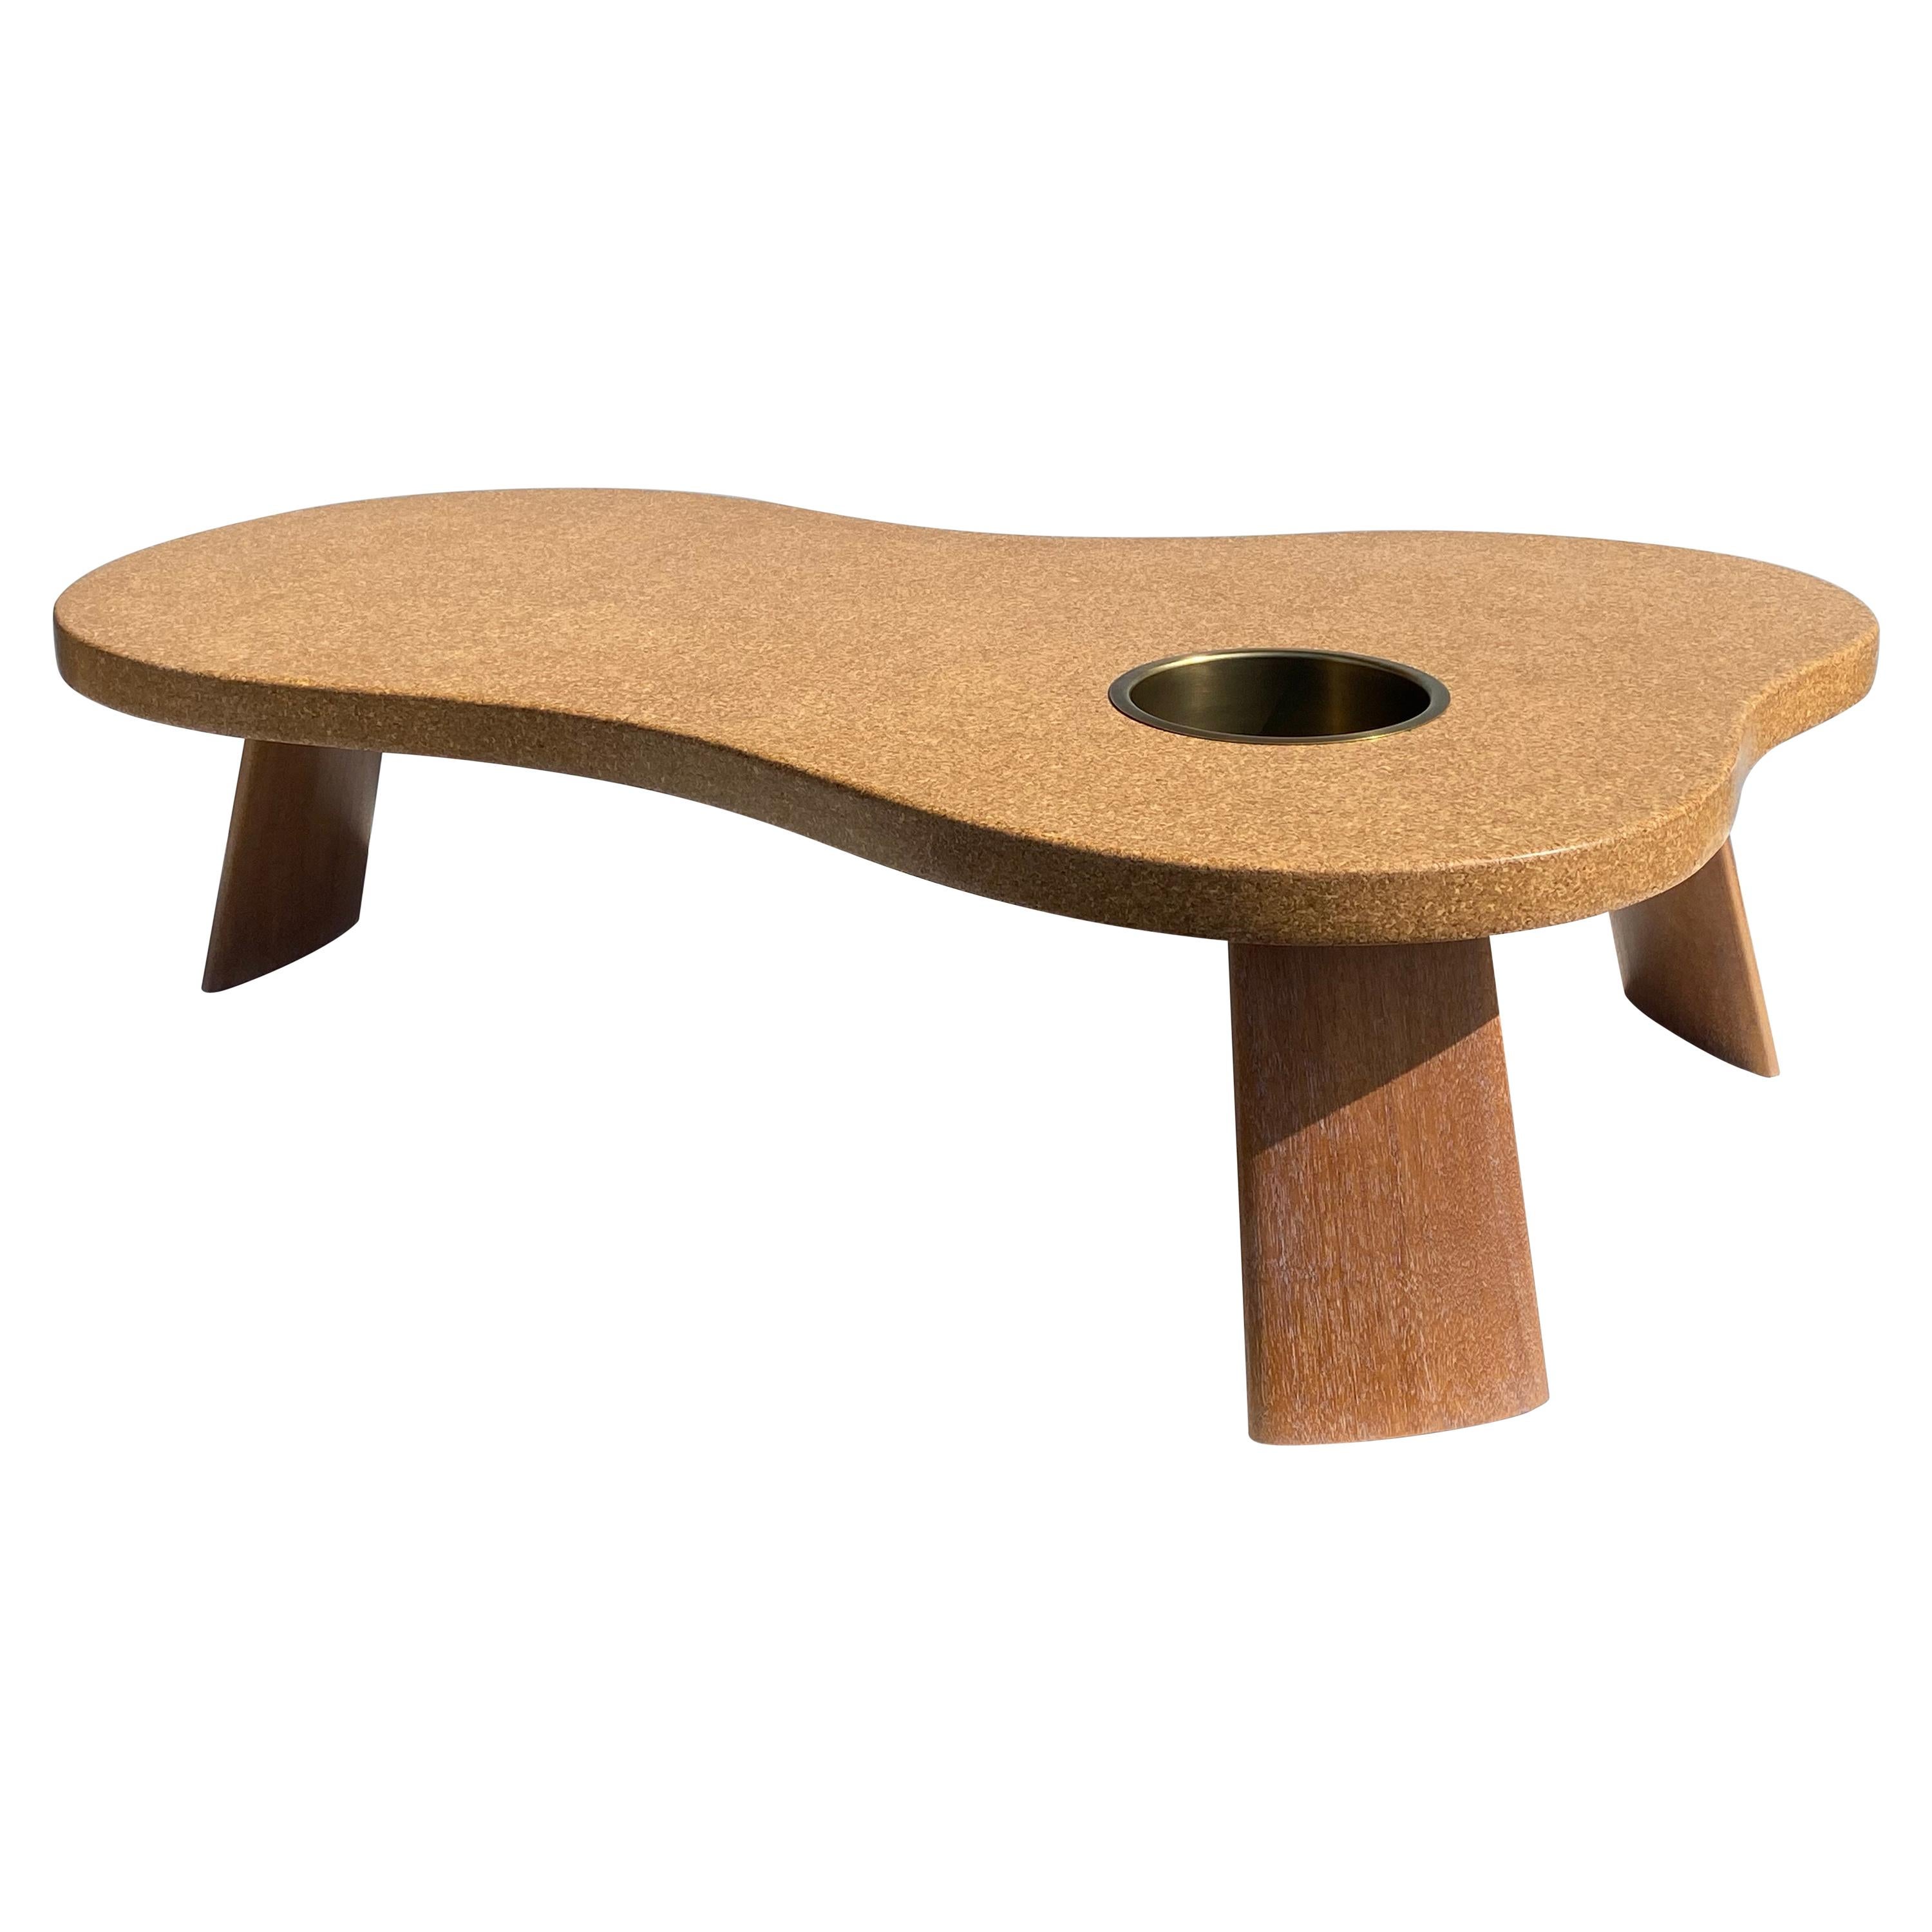 Organic Shape Cork and Mahogany Coffee Table with Planter